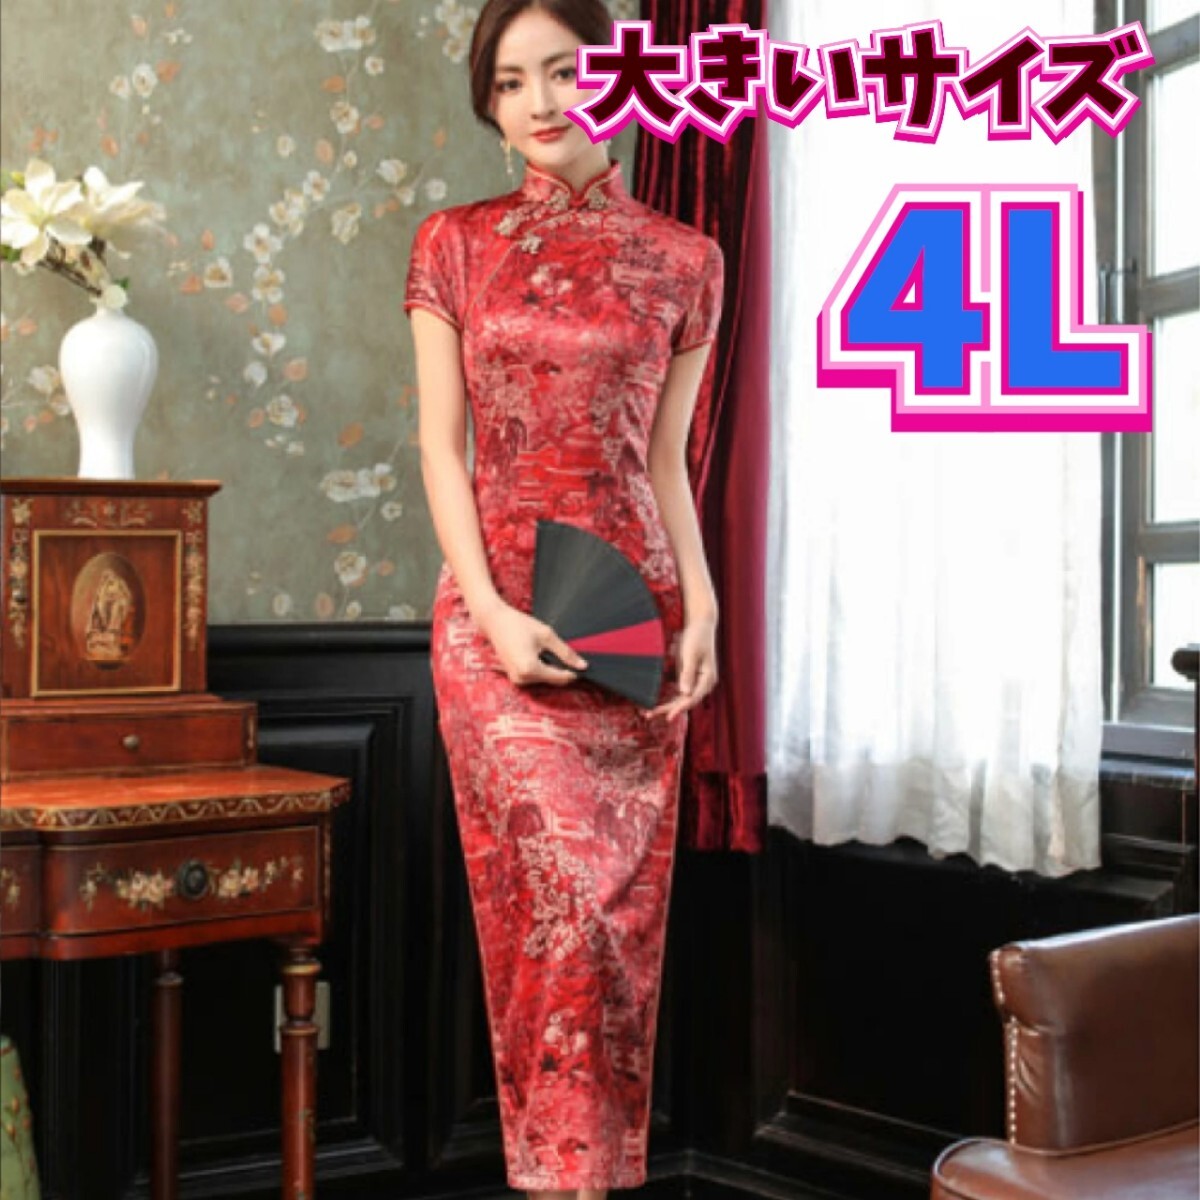  China dress tea ina clothes sexy cosplay night dress new goods costume play clothes large size 3XL 4L size 